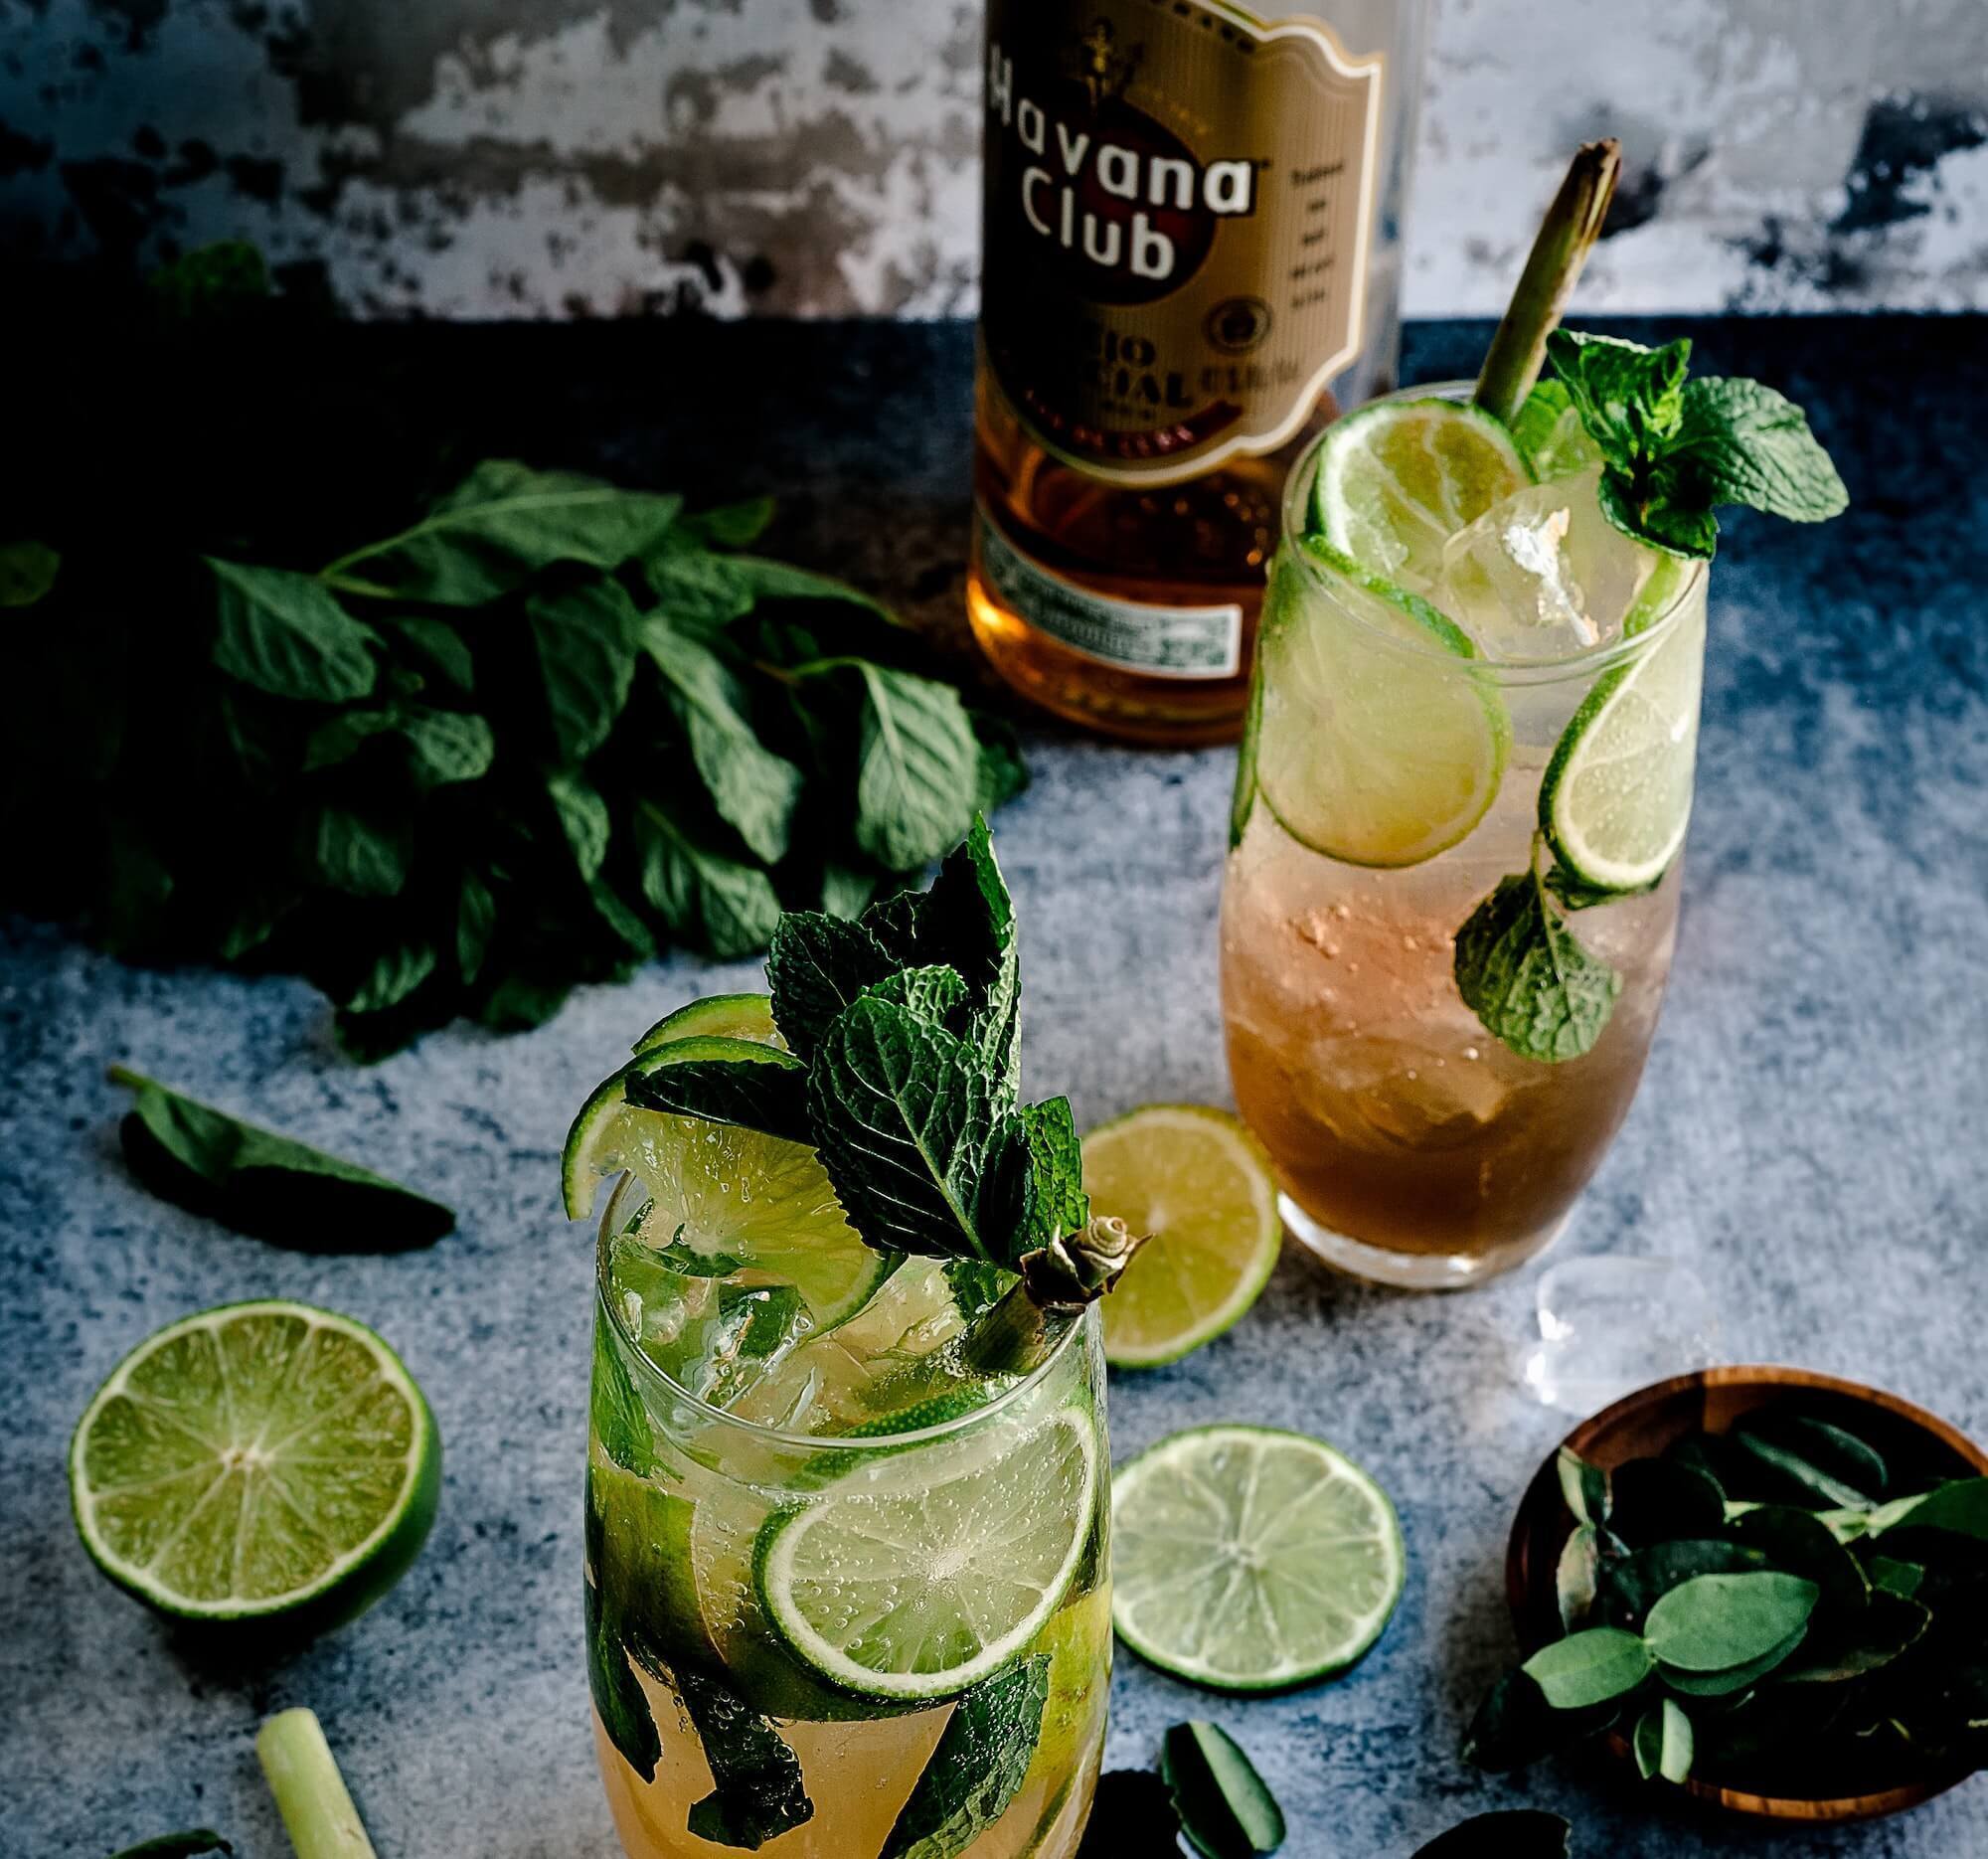 Bottle of Havana Club rum, mojito cocktails, mint and sliced lime on countertop